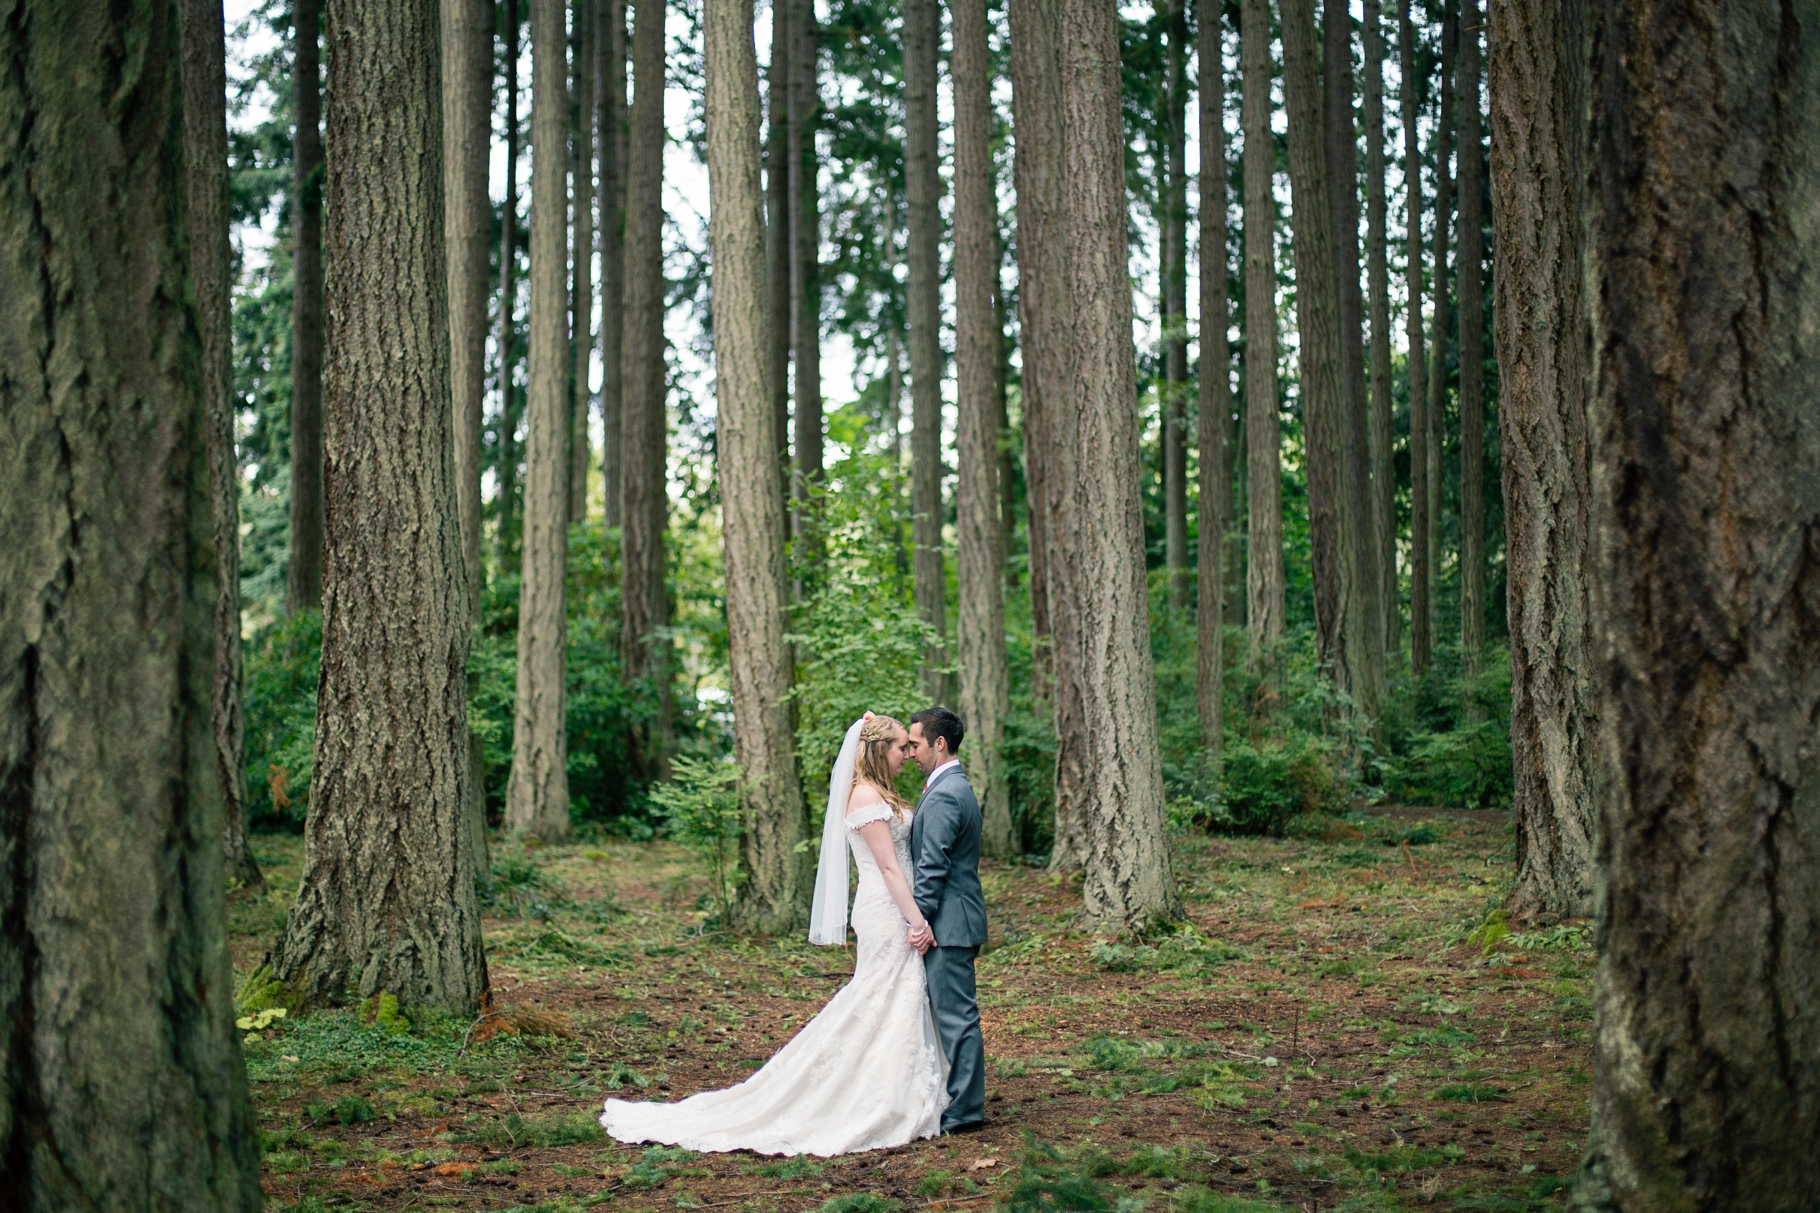 Bride-Groom-Portraits-Married-Bridal-Beach-Ocean-Romantic-wooded-bluff-olympic-mountains-log-cabin-Kitsap-Memorial-State-Park-Forest-Northwest-Photographer-Seattle-Wedding-Photography-by-Betty-Elaine